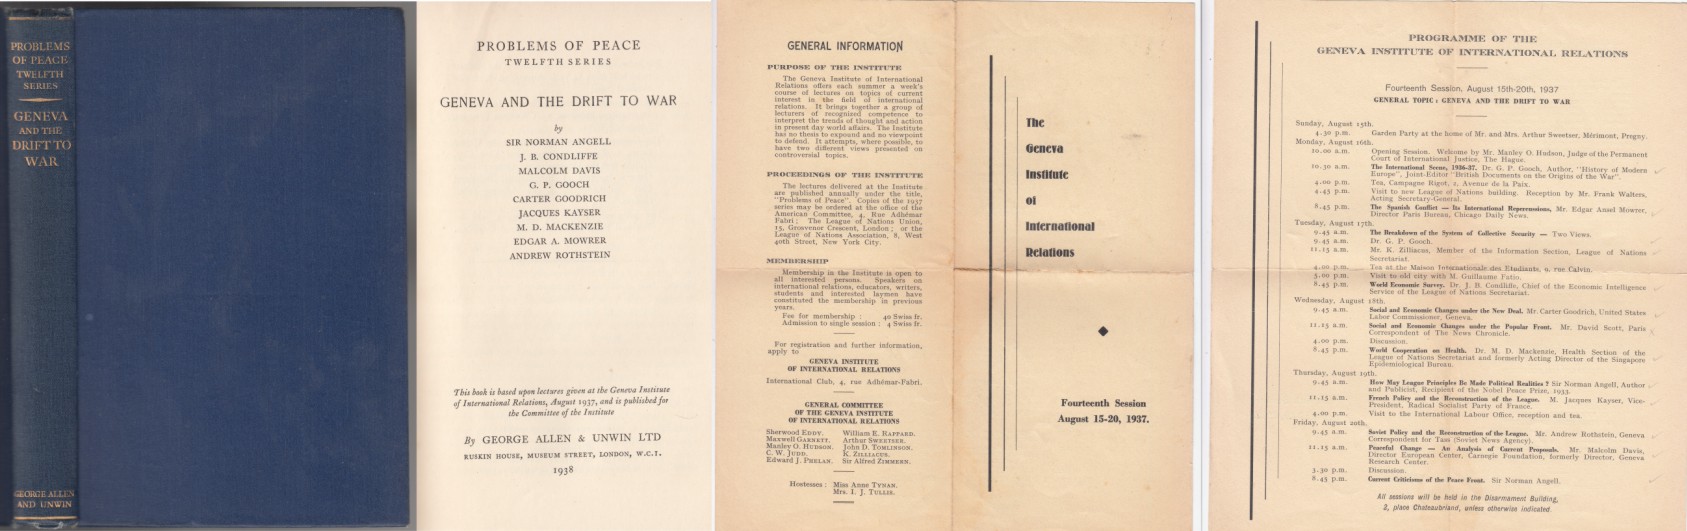 Image for Geneva and the Drift to War w/Actual Programme of the Geneva Institute Of International Relations Aug 15th-29th 1937 Laid In. Lectures Delivered at the Geneva Institute of International Relations August 1937. Problems of Peace Twelfth Series